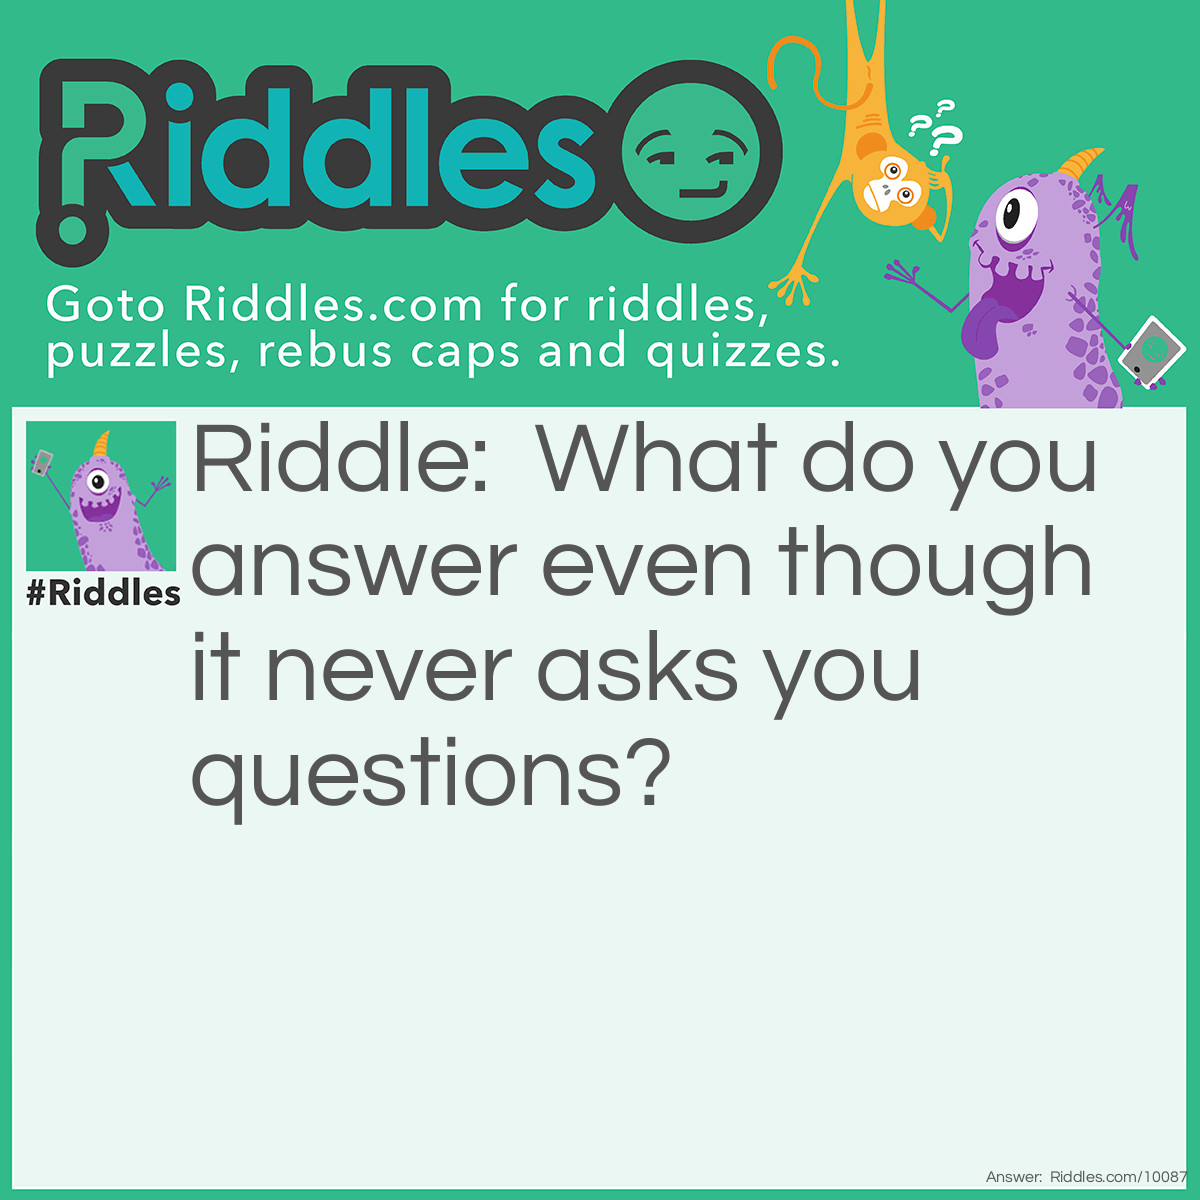 Riddle: What do you answer even though it never asks you questions? Answer: a door bell or a phone